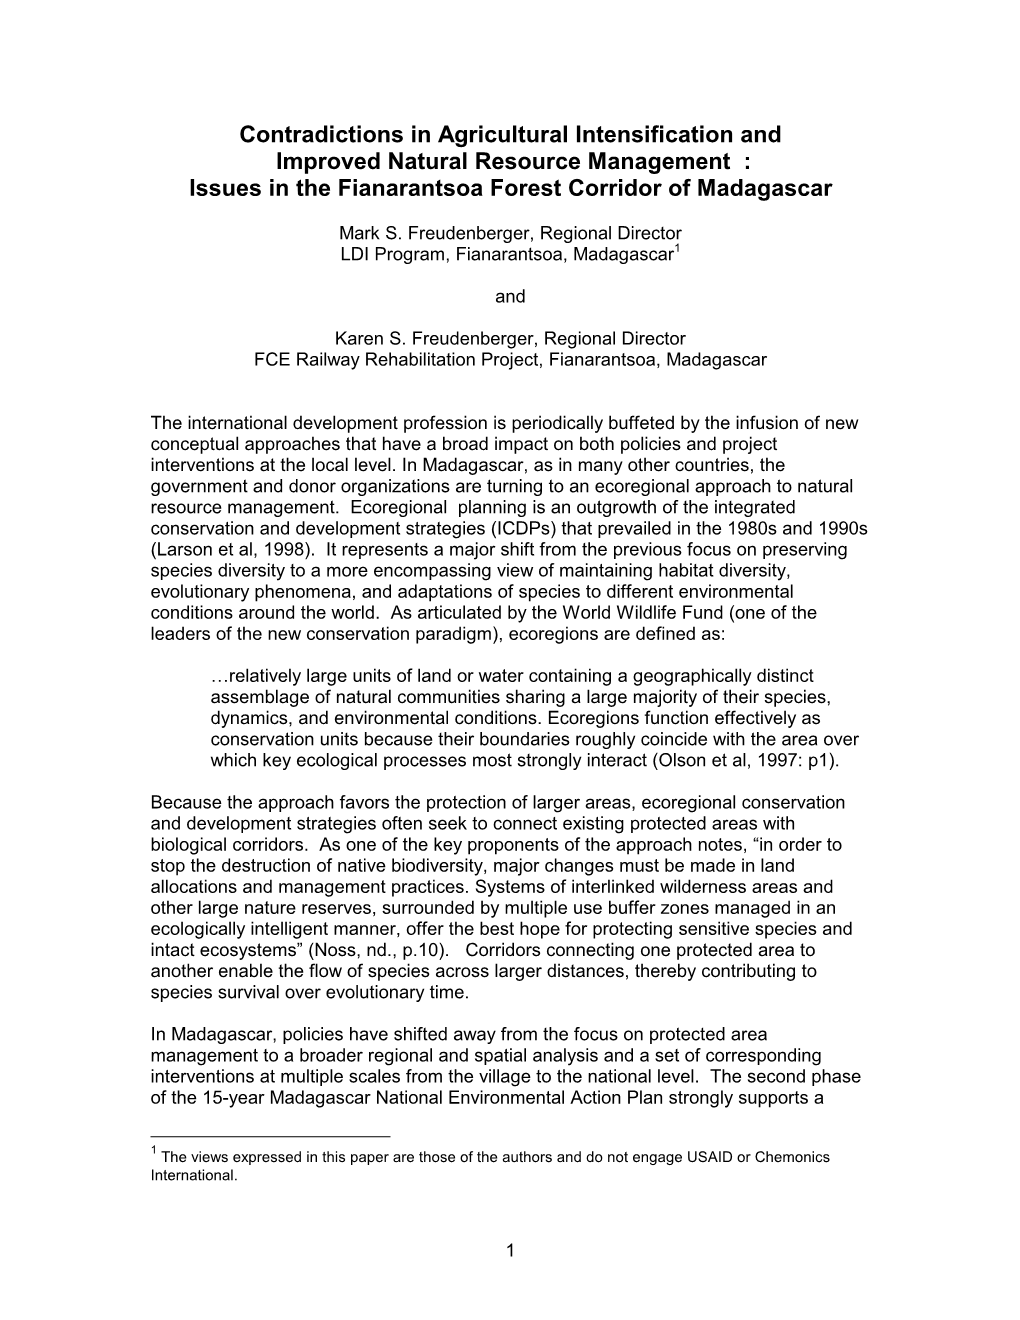 Contradictions in Agricultural Intensification and Improved Natural Resource Management : Issues in the Fianarantsoa Forest Corridor of Madagascar